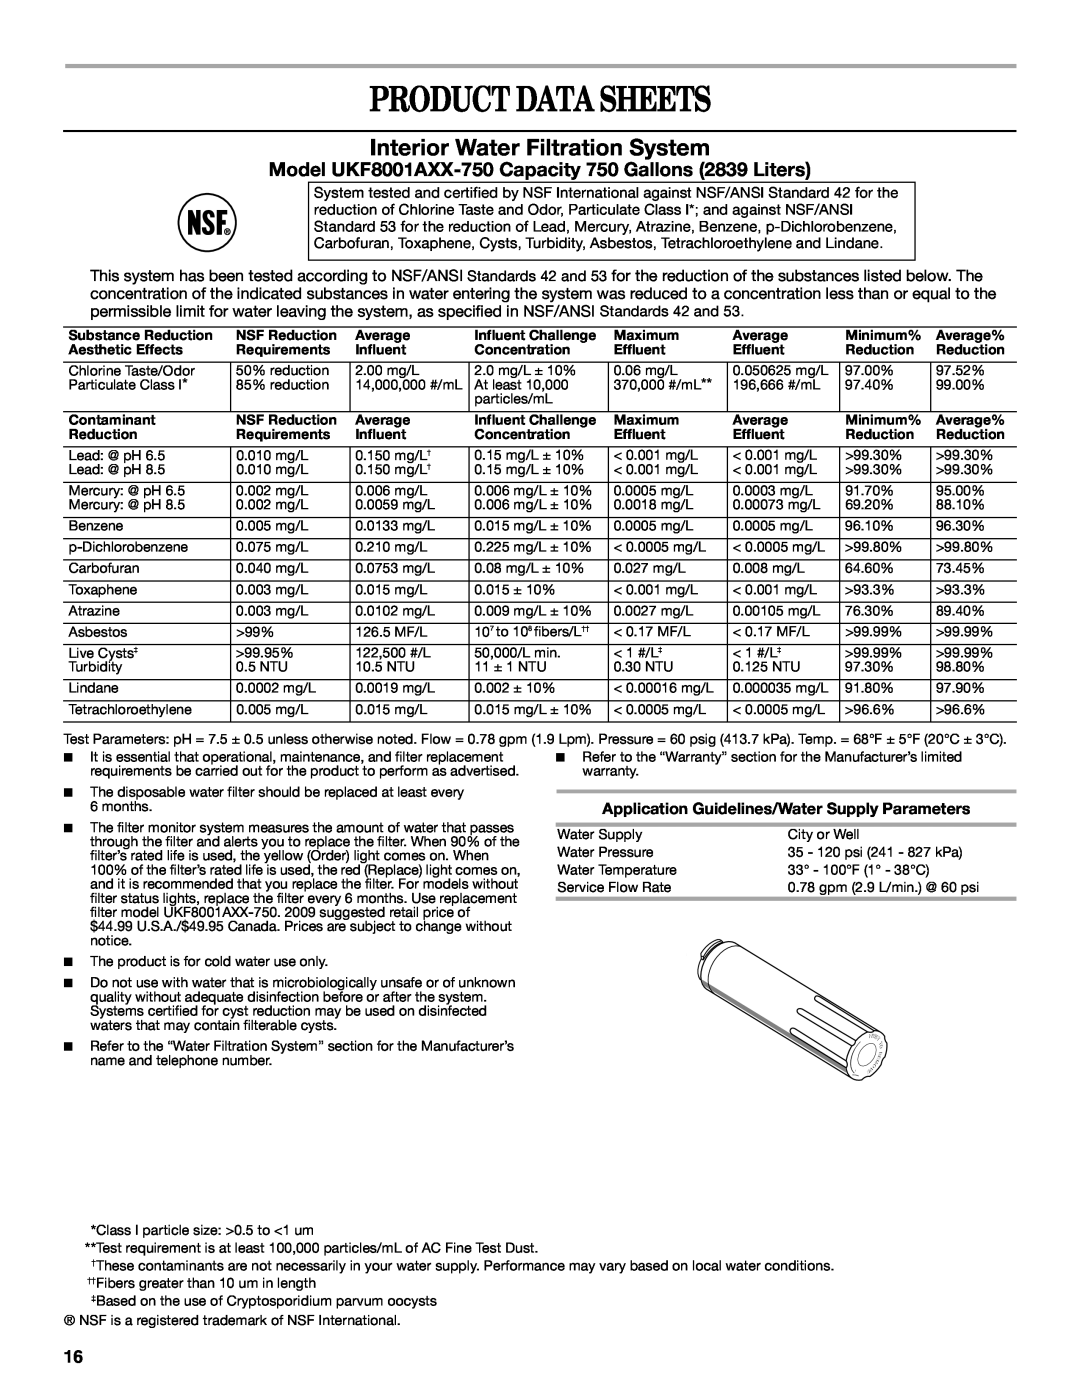 Whirlpool W10226405A Product Data Sheets, Interior Water Filtration System, Application Guidelines/Water Supply Parameters 